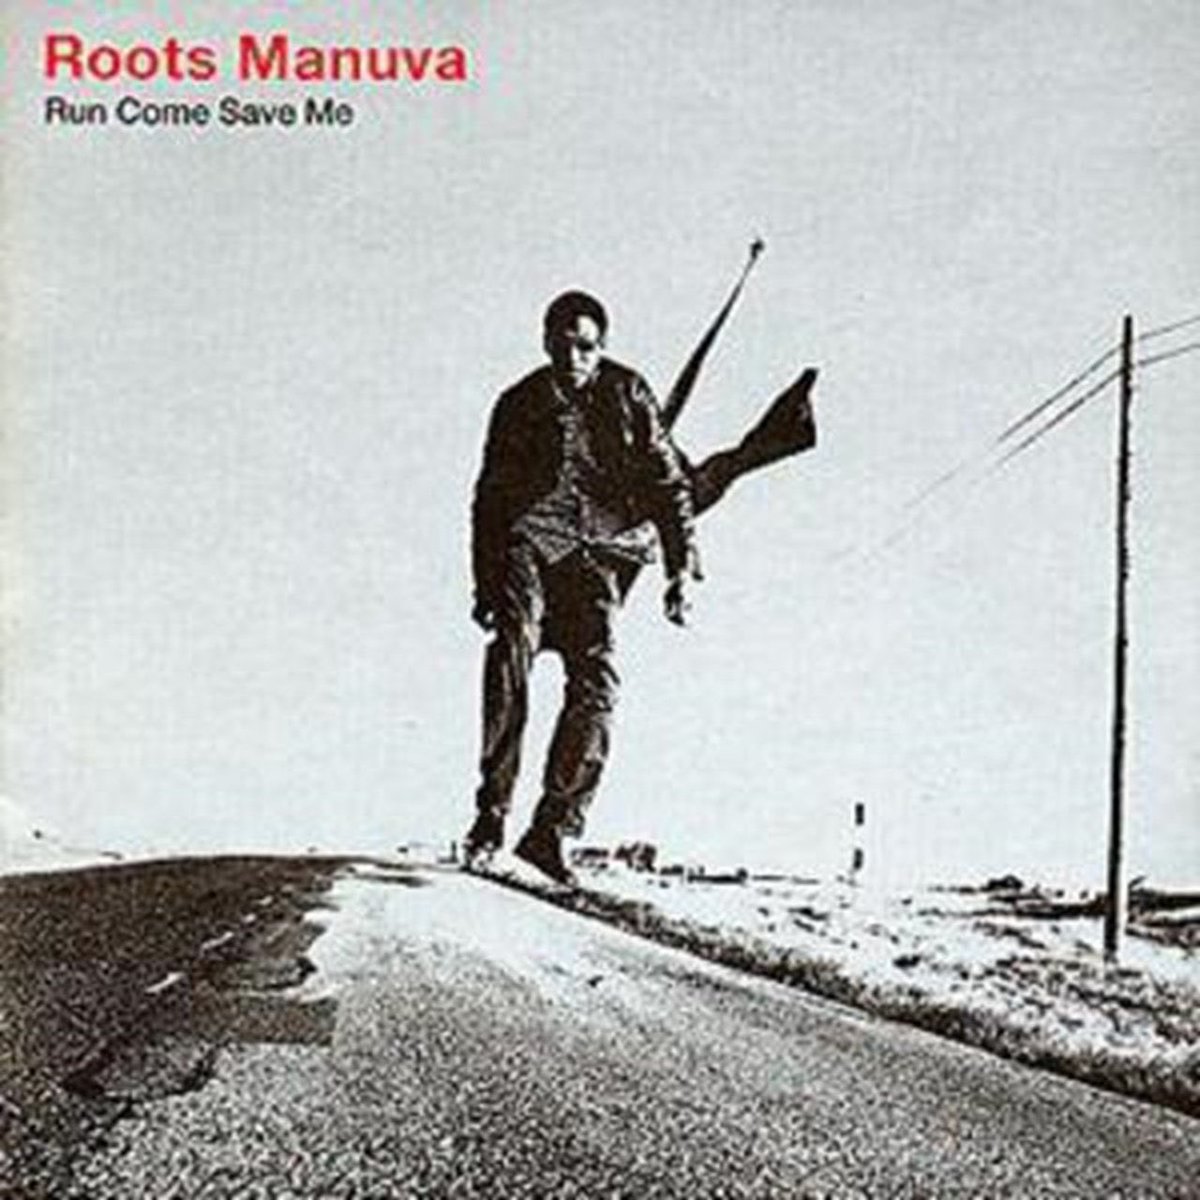  @rootsmanuva - Run Come Save MeIn what is sonically an ode to KRS-One, Roots’ inspirations are not worn lightly. He does, however, manage to deliver a great listen, taking you through his life’s struggles and regrets. A vulnerable album that also shows his witty side at times.